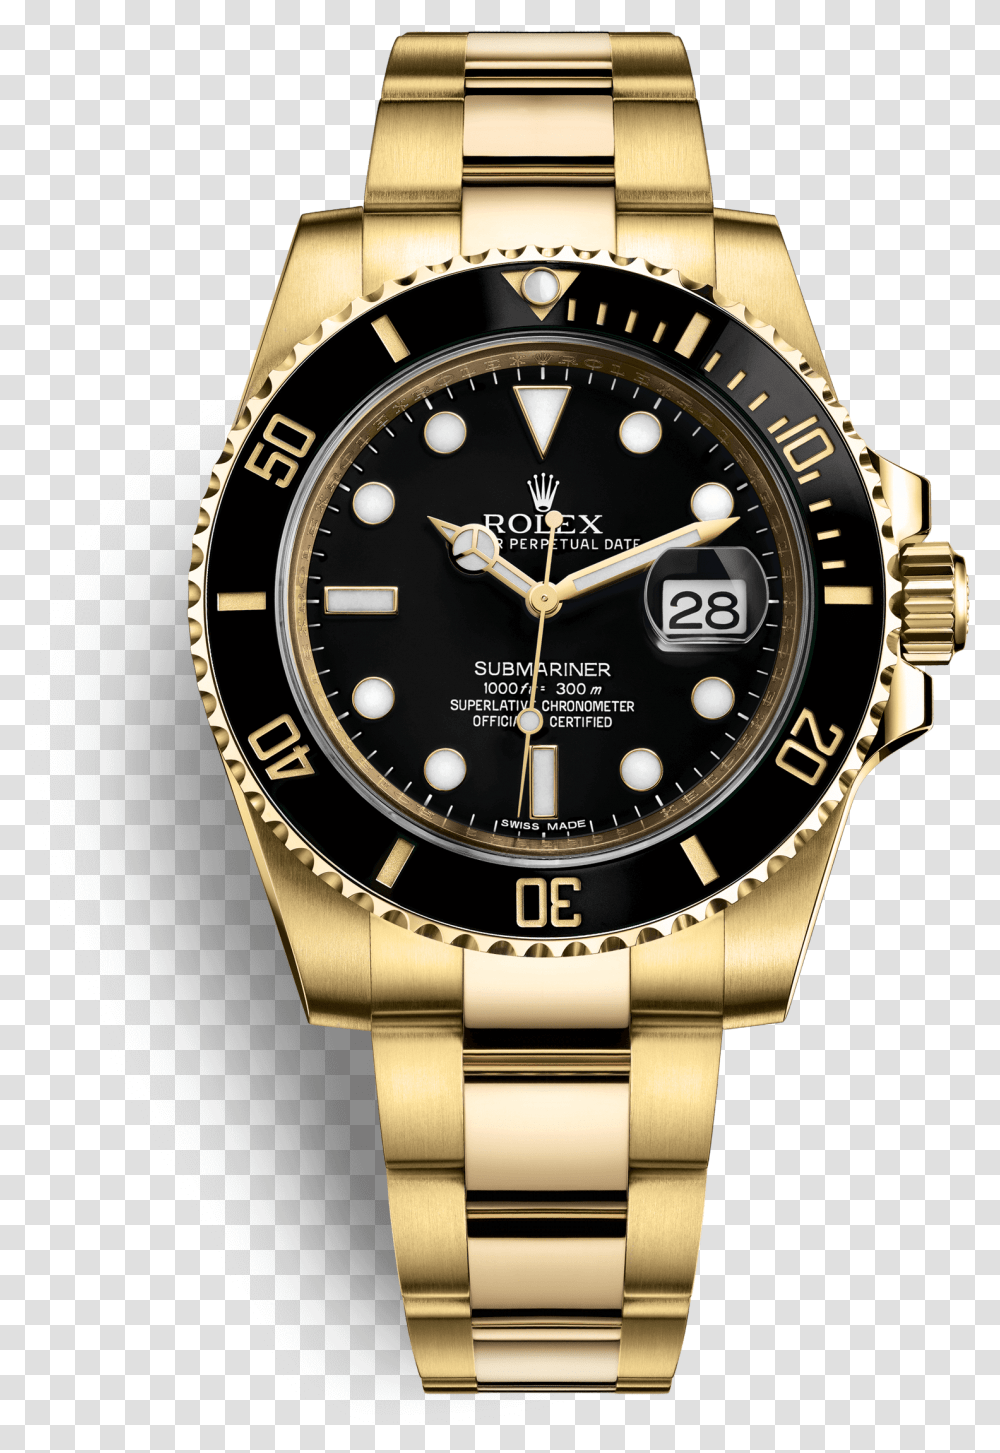 Submariner Watch Rolex Gold Colored Rolex Submariner Gold Black, Wristwatch, Text, Clock Tower, Architecture Transparent Png